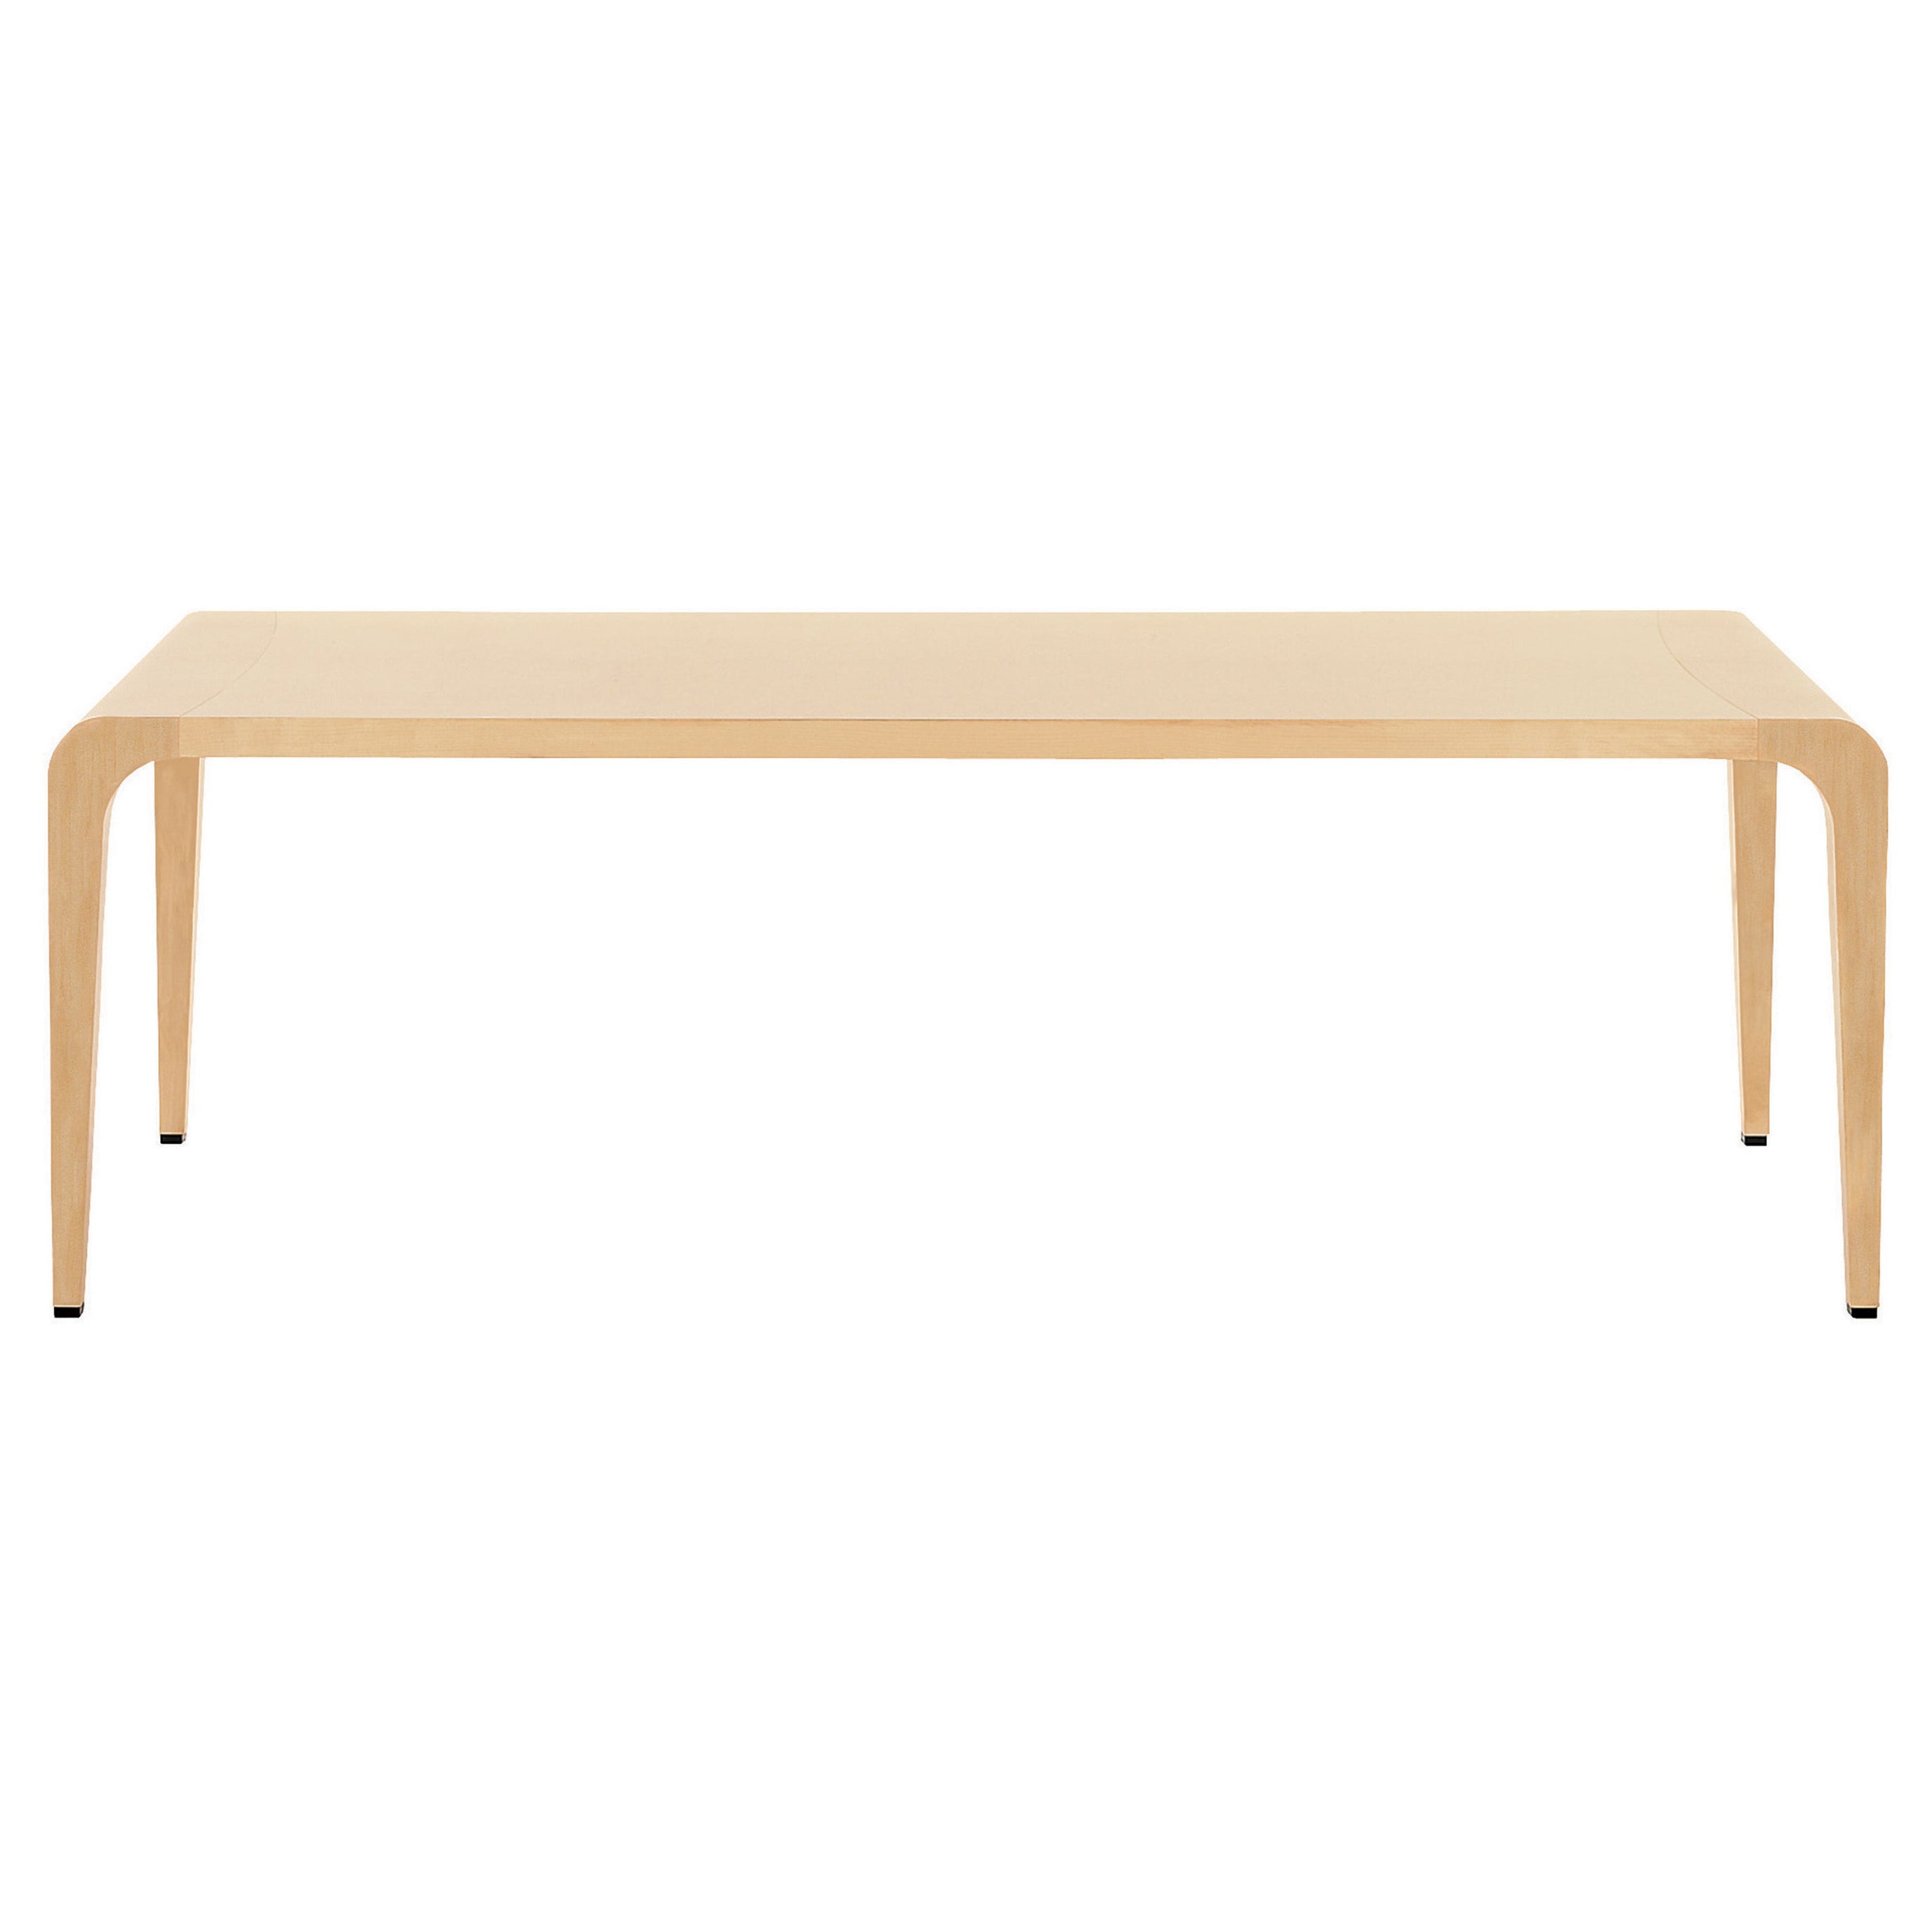 Alias Large 390 Ilvolo Table in Natural Maple Wood Top and Frame